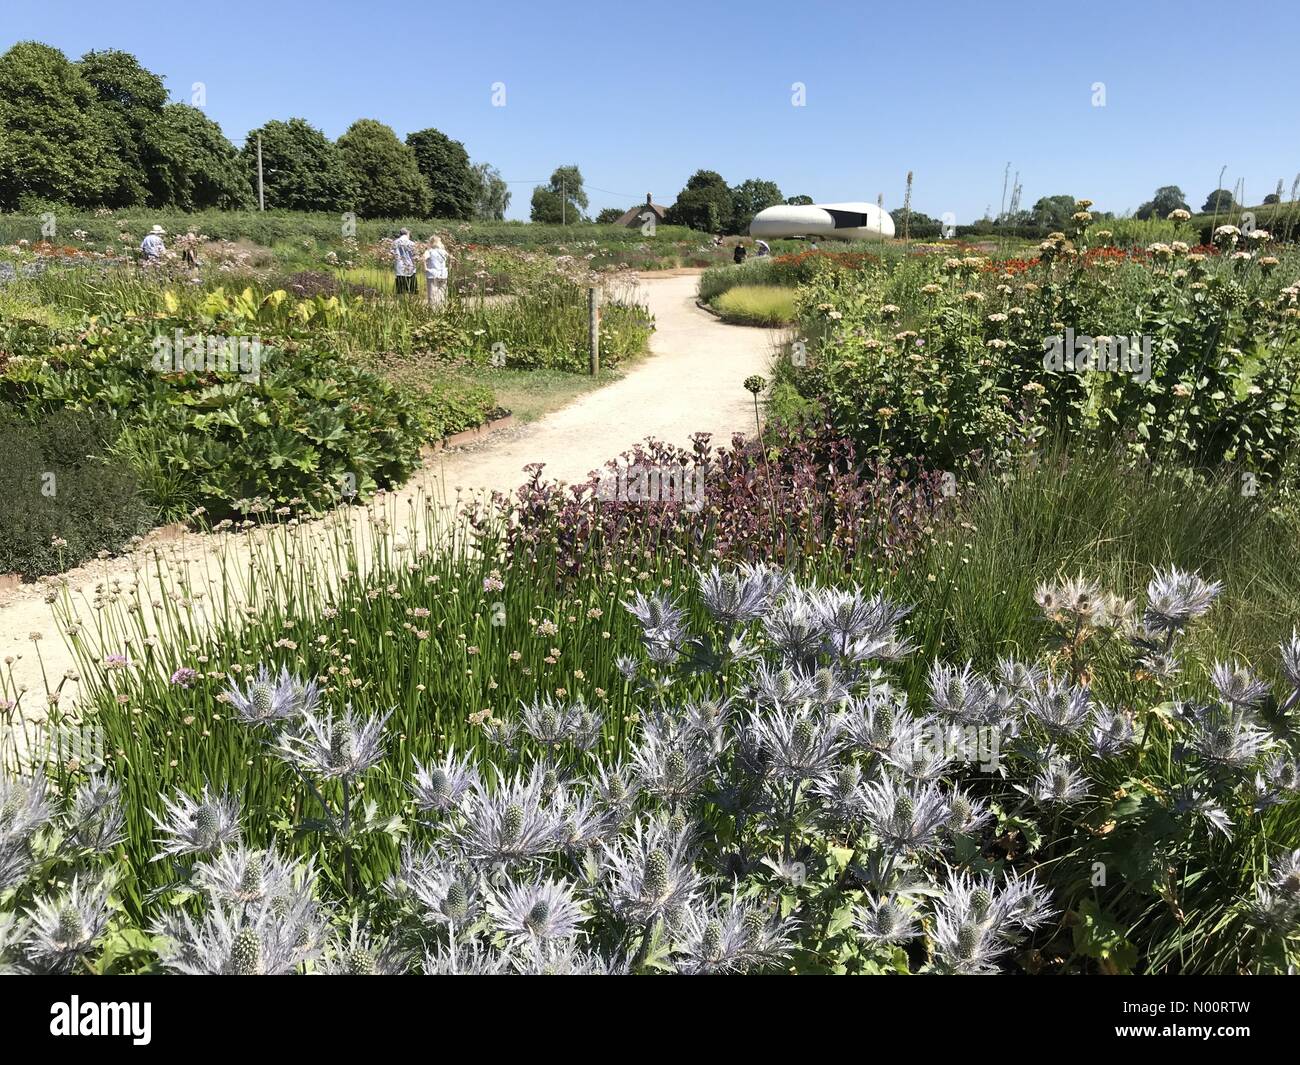 Somerset, UK, 30 June 2018. UK Weather : The heatwave continues as people enjoy the sizzling sunshine in the beautiful Oudolf Field, designed by Piet Oudolf, Hauser & Wirth, Bruton, Somerset, England Credit: Josie Elias/StockimoNews/Alamy Live News Stock Photo